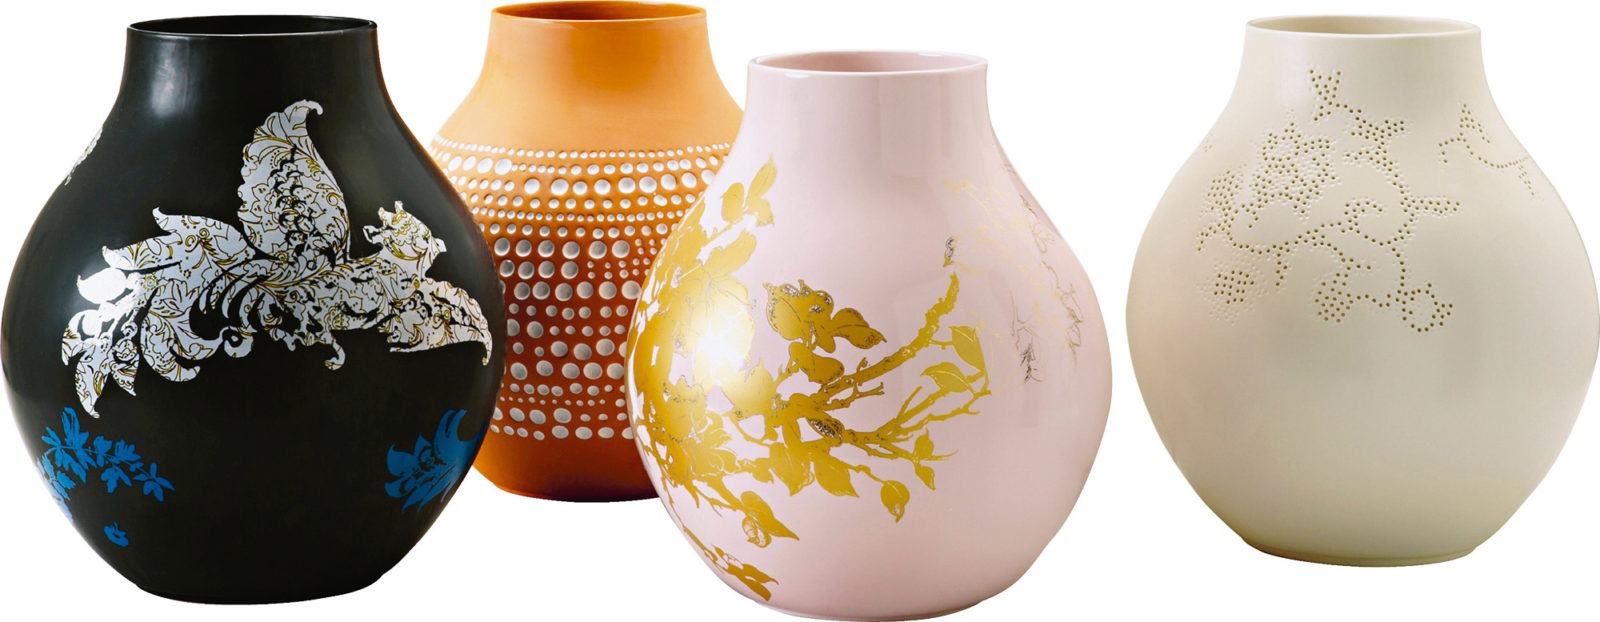 Four rounded vases in different patterns and colours, including pink with gold decorations and black with white decorations.